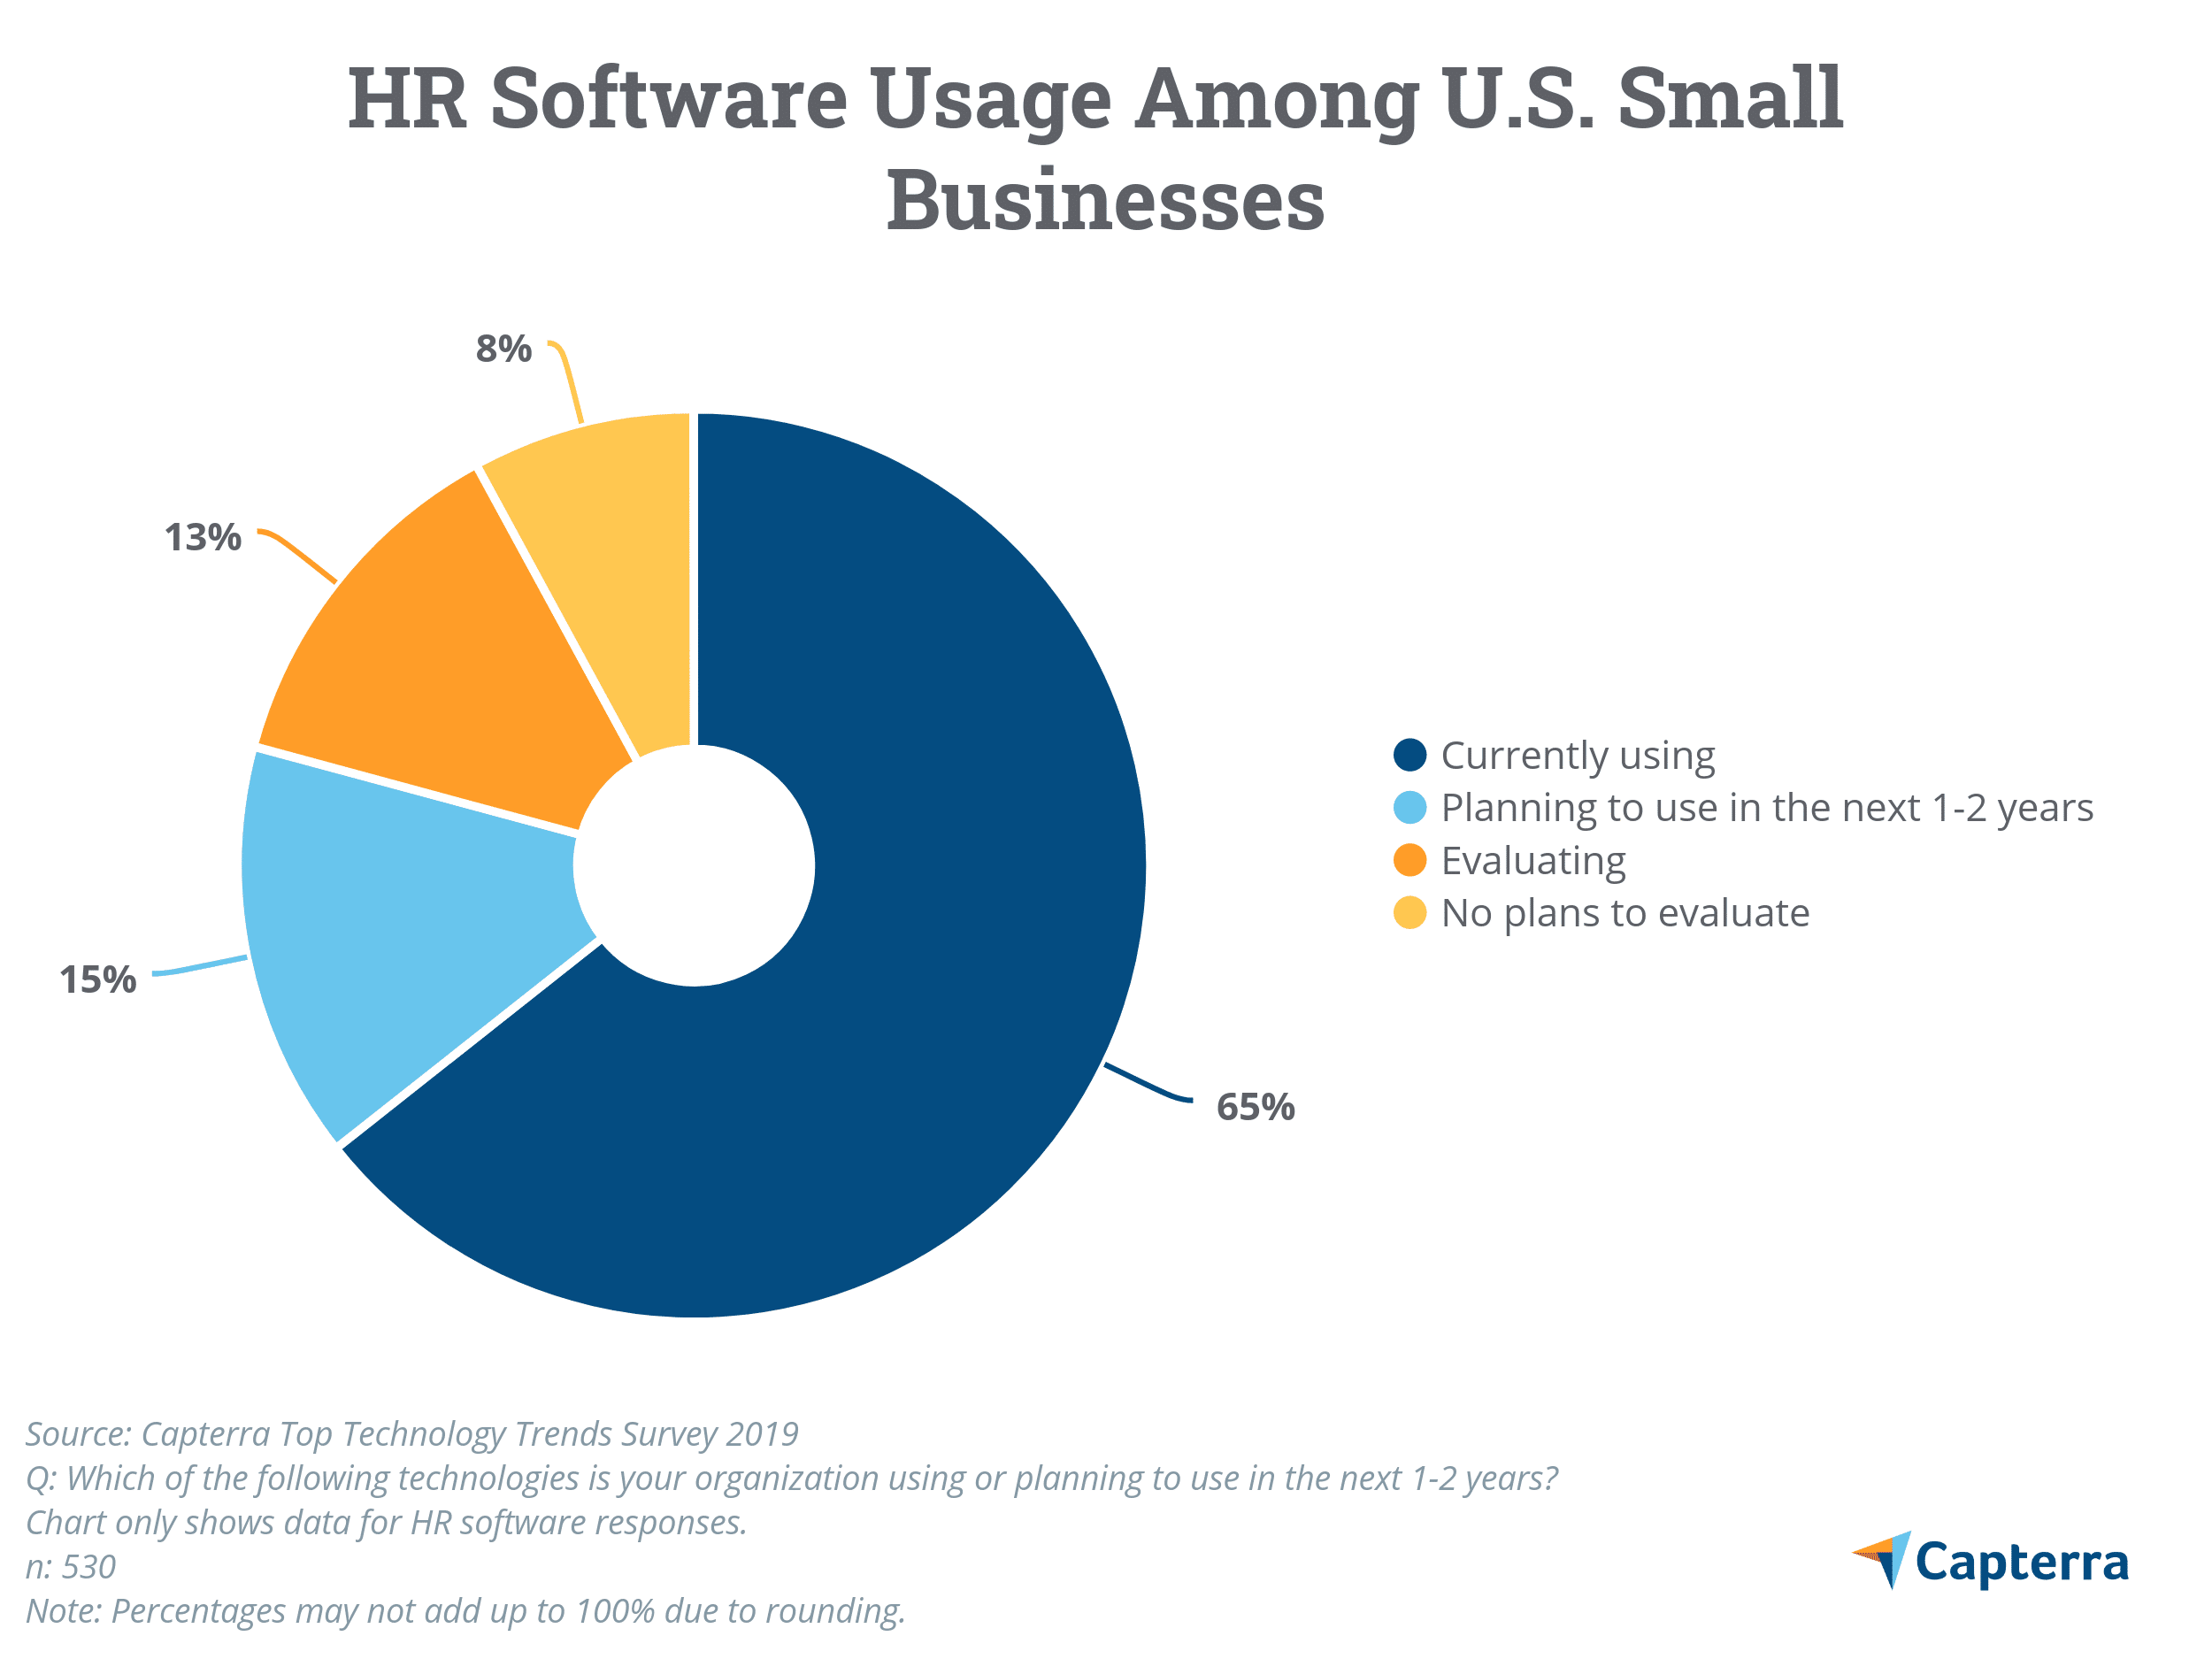 HR software usage among US small businesses. Captera